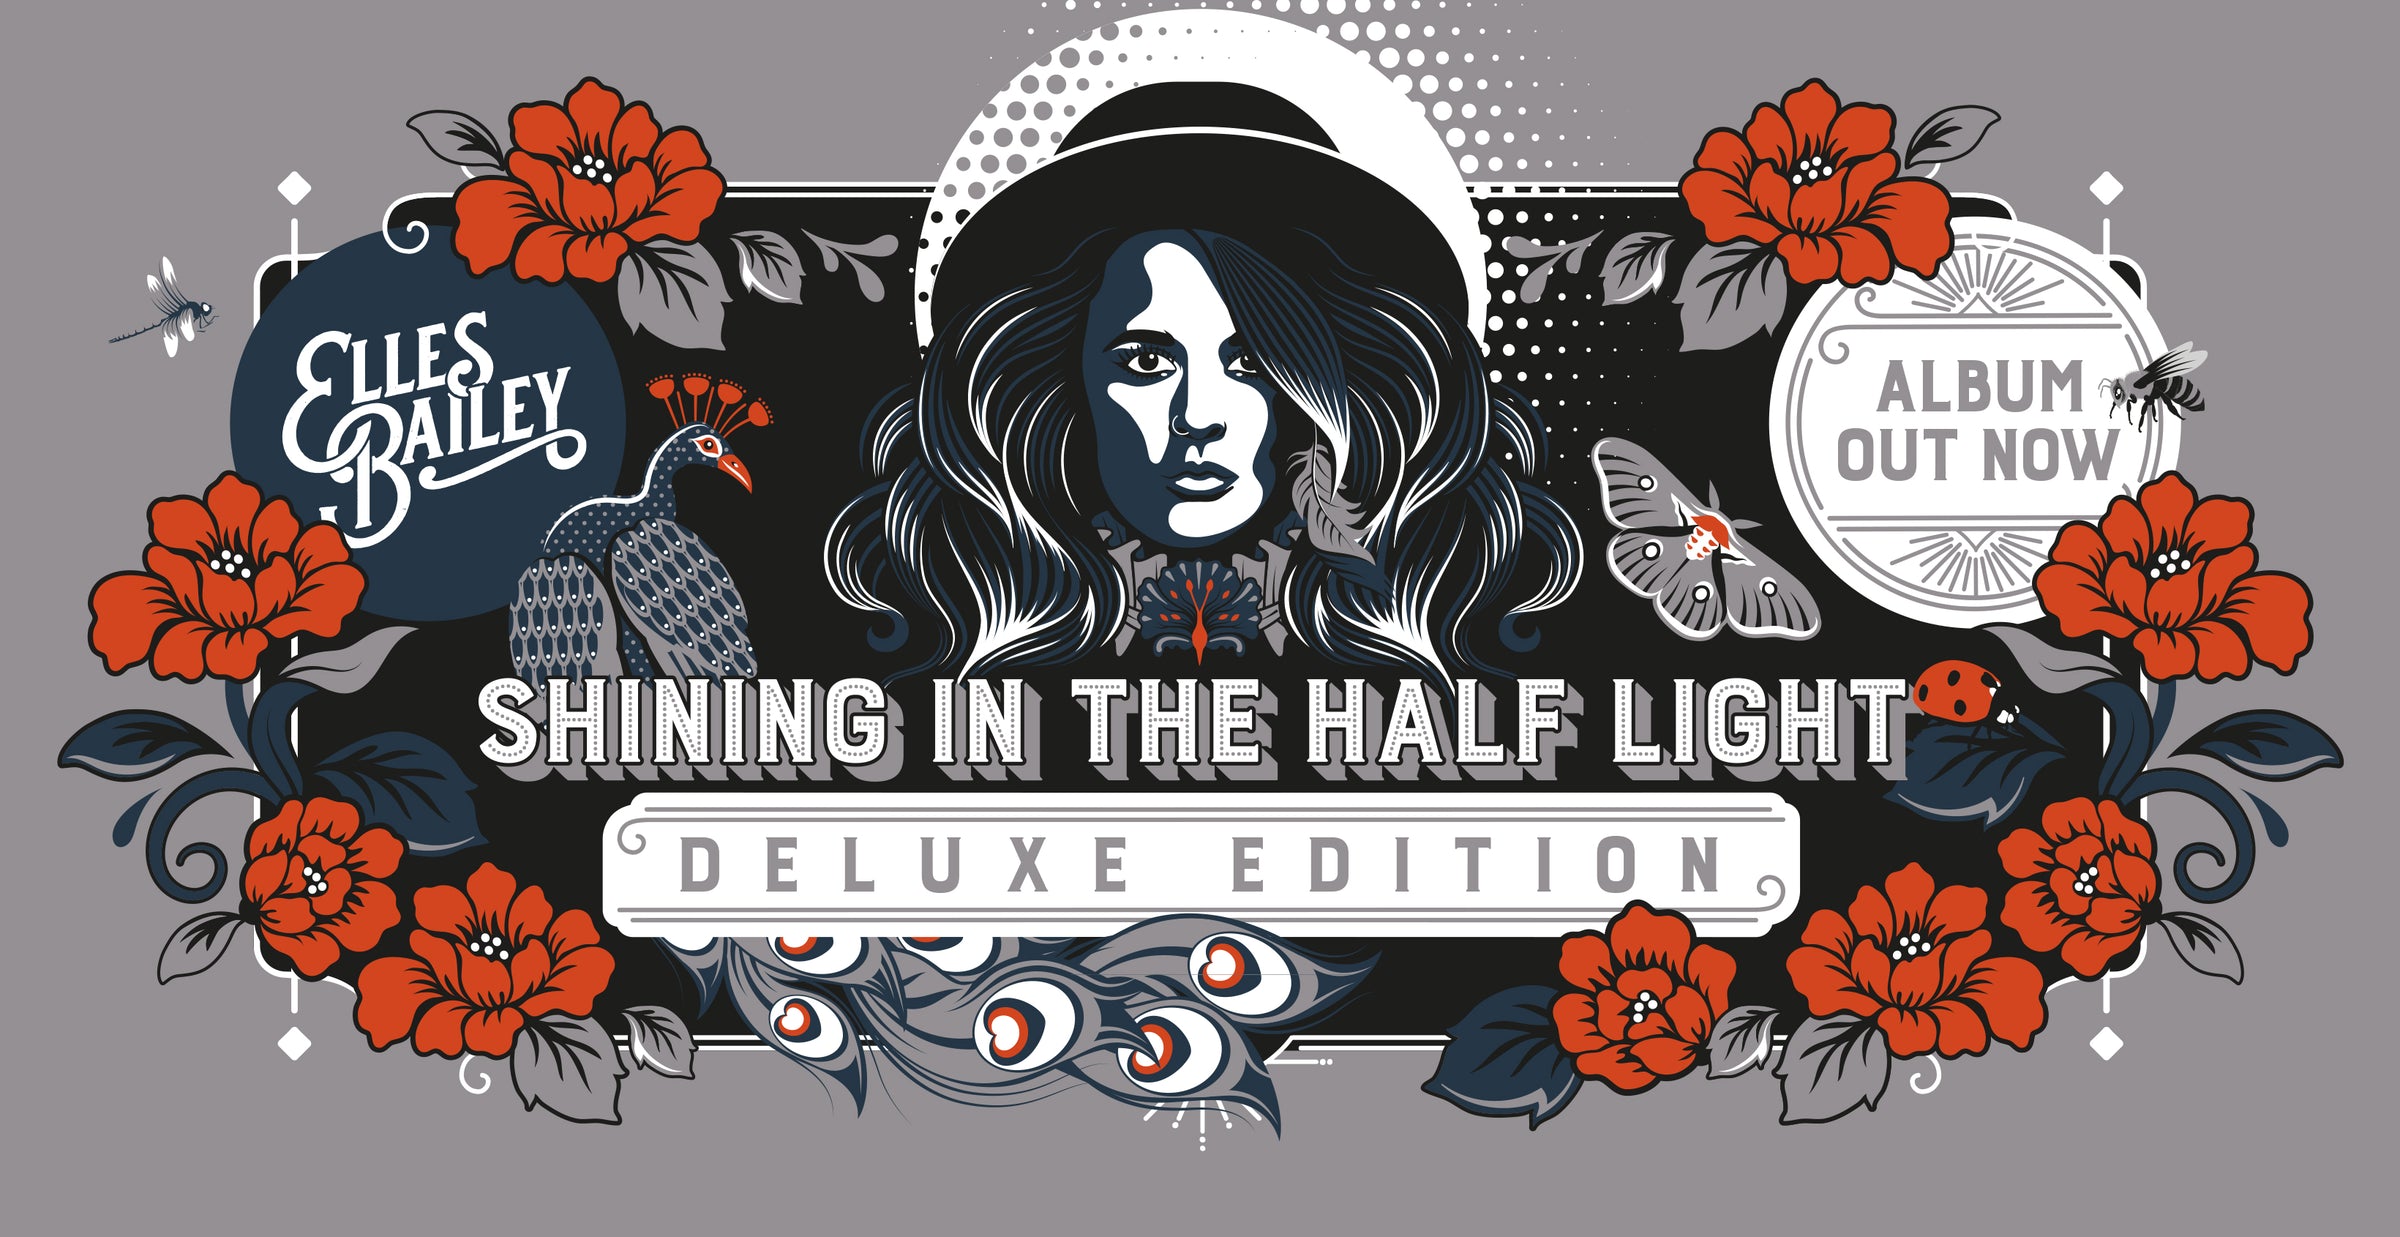 Shining in the Half Light Deluxe